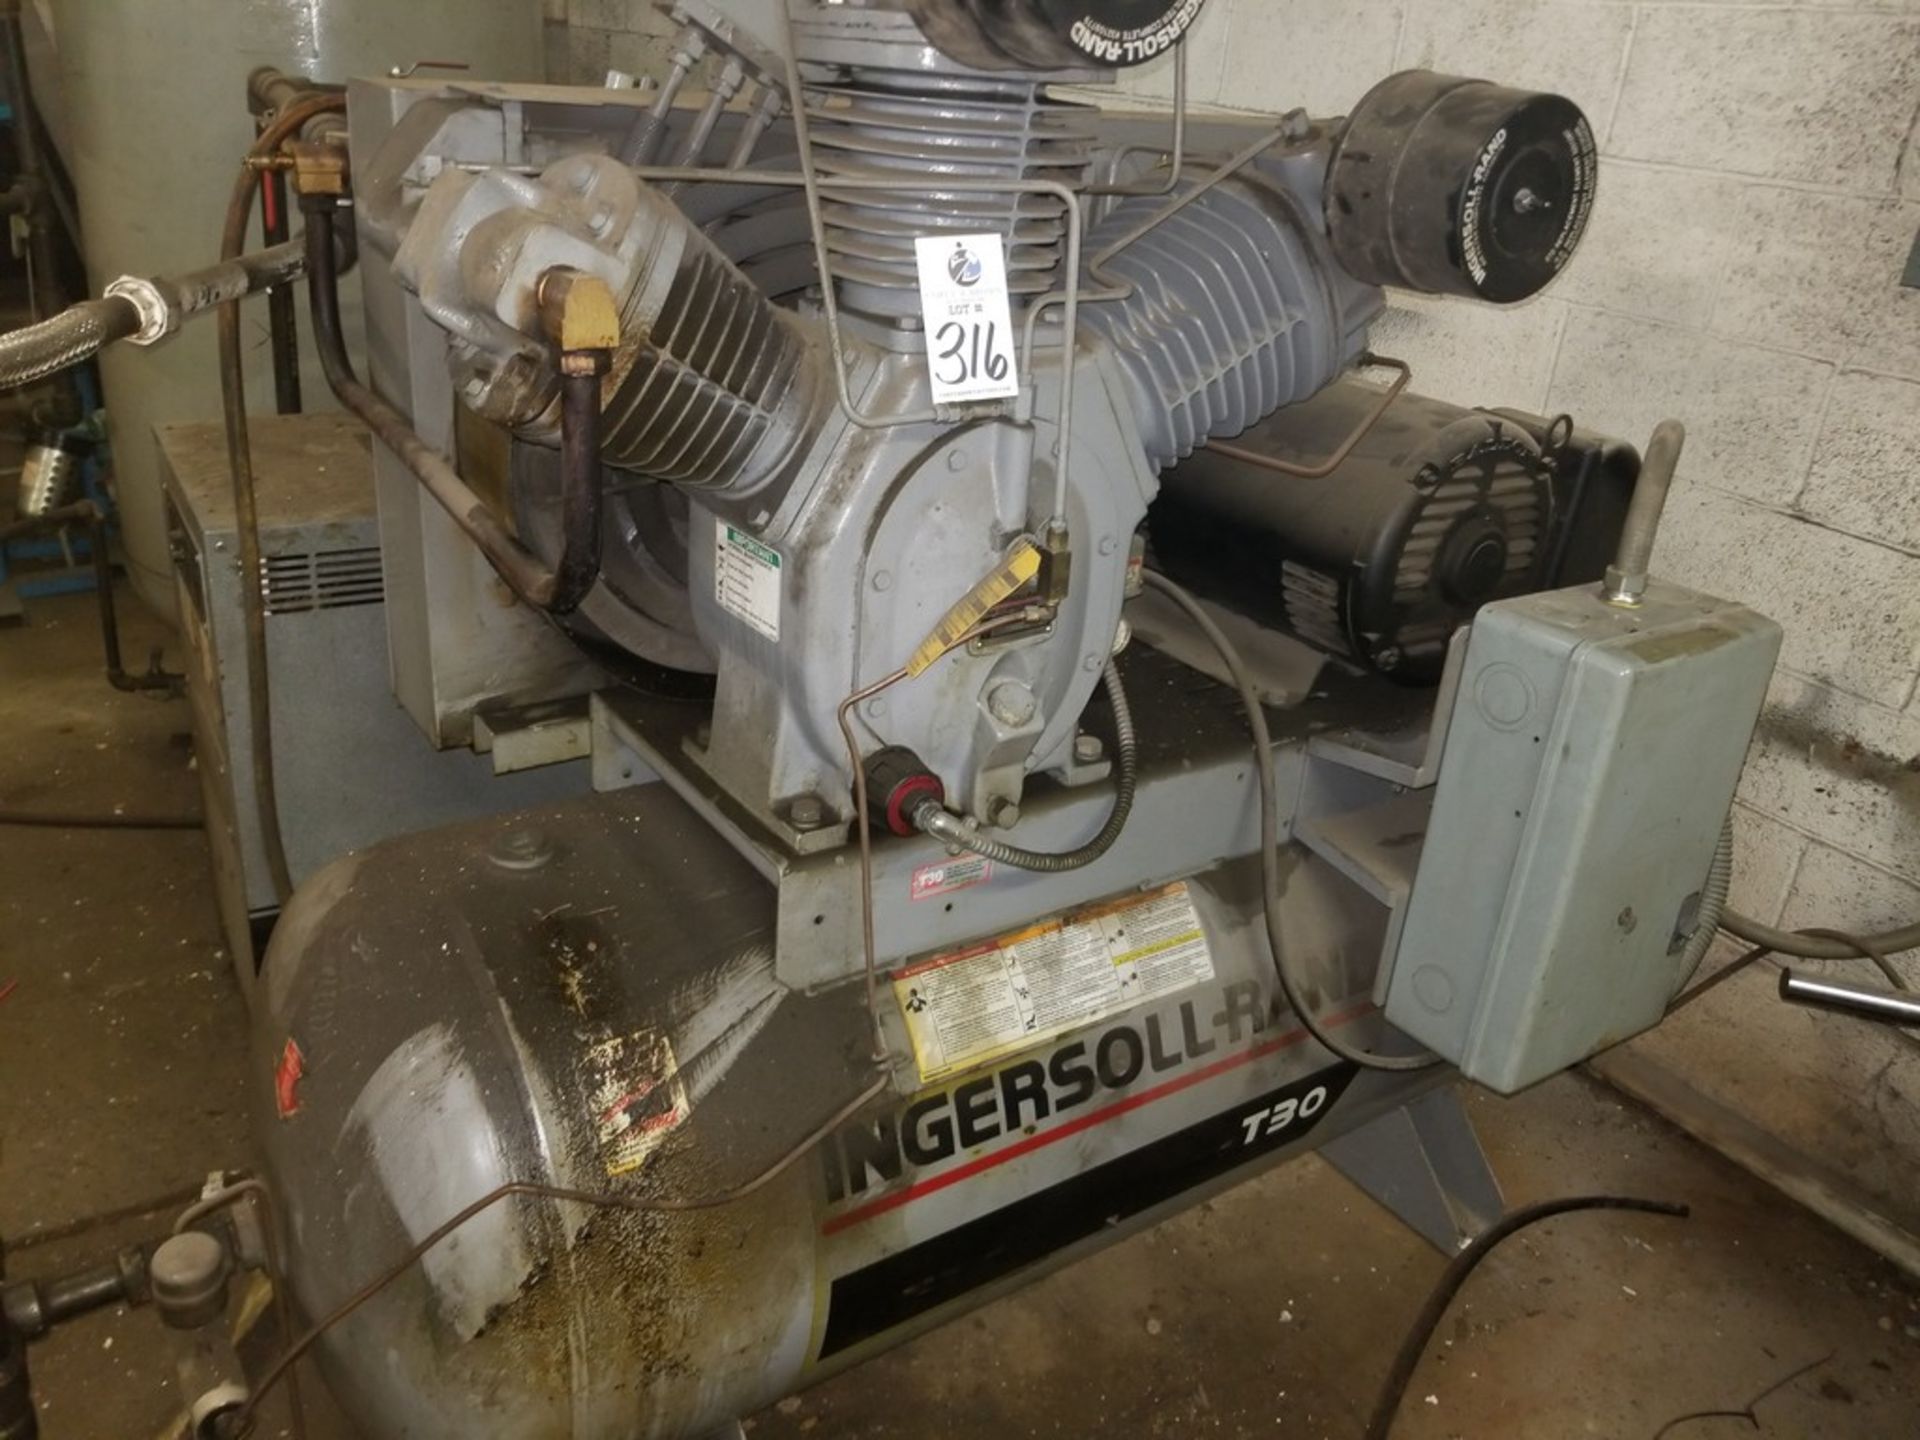 Ingersoll-Rand 2 Stage Air Compressor w/ AirTelc Air Dryer - Image 2 of 4